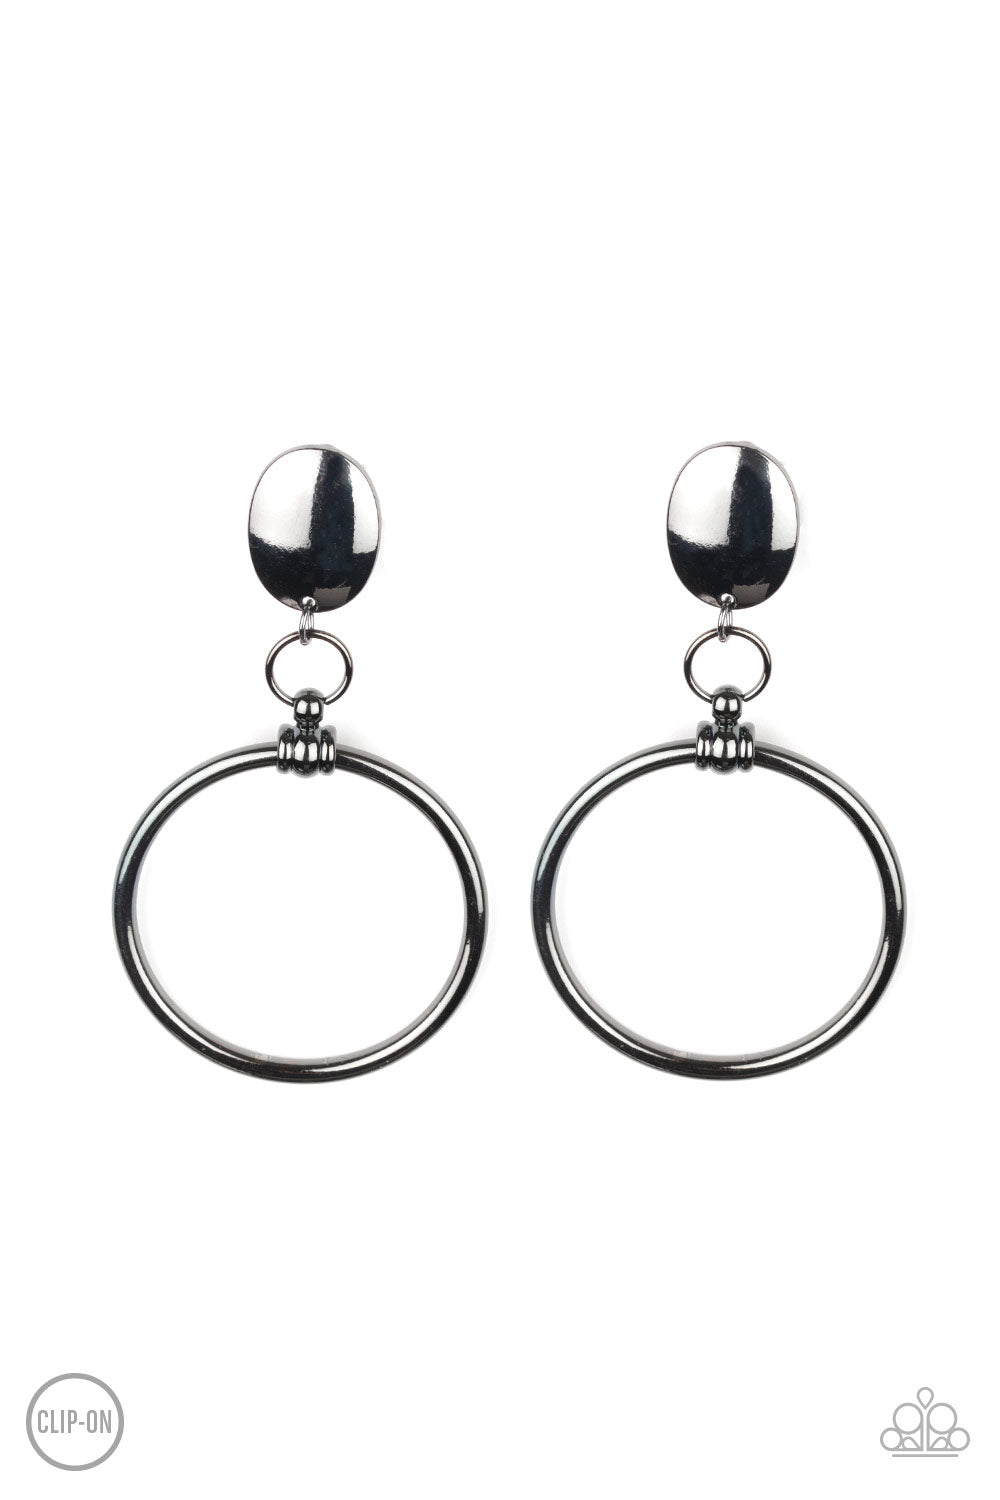 Jumping Through Hoops - Black Earrings (Clip On) - Paparazzi Accessories 